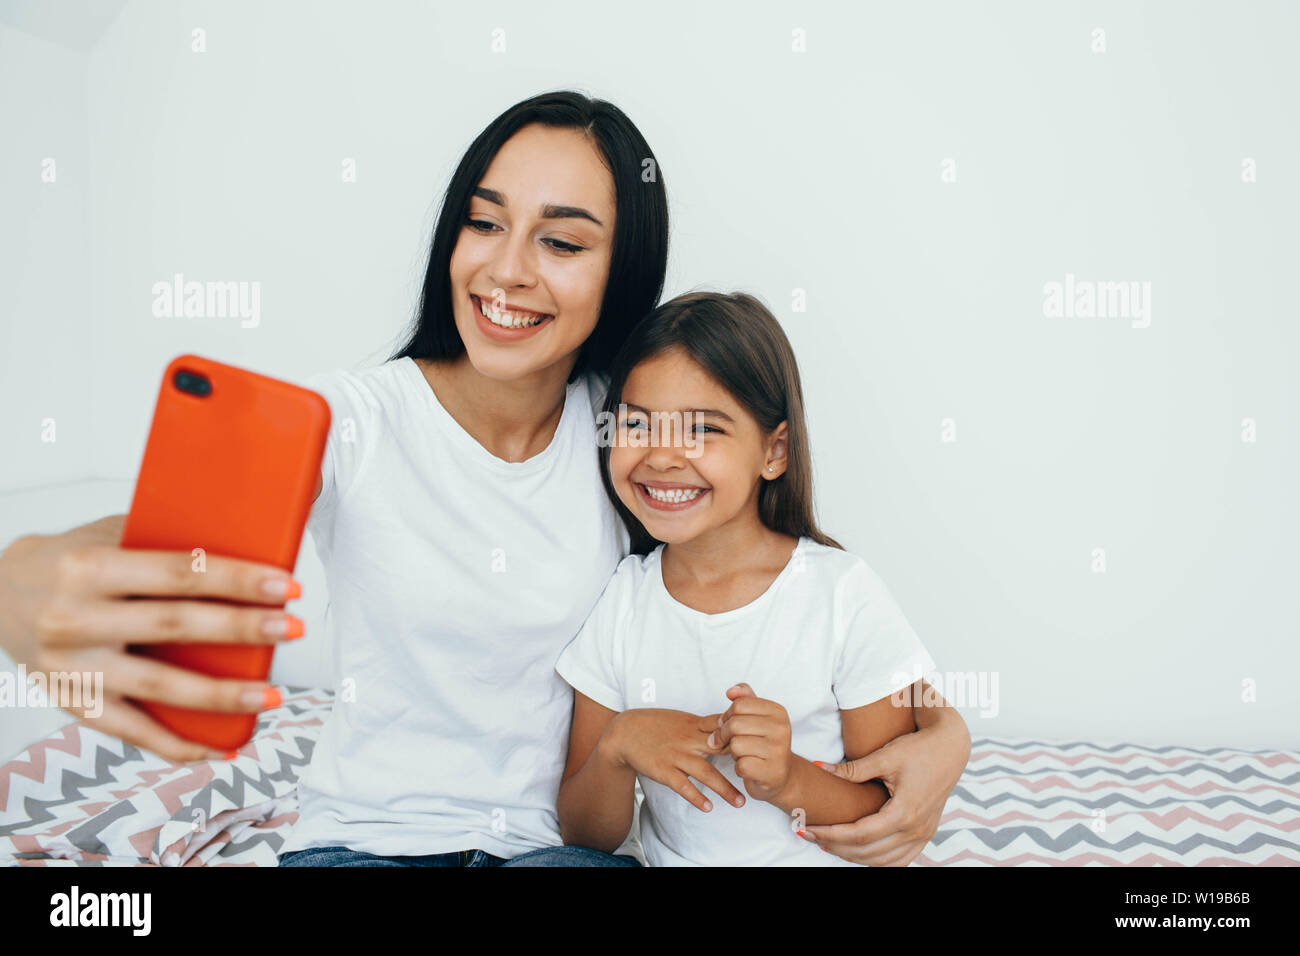 Mother and daughter funny spending time at home. Making selfie on phone Stock Photo